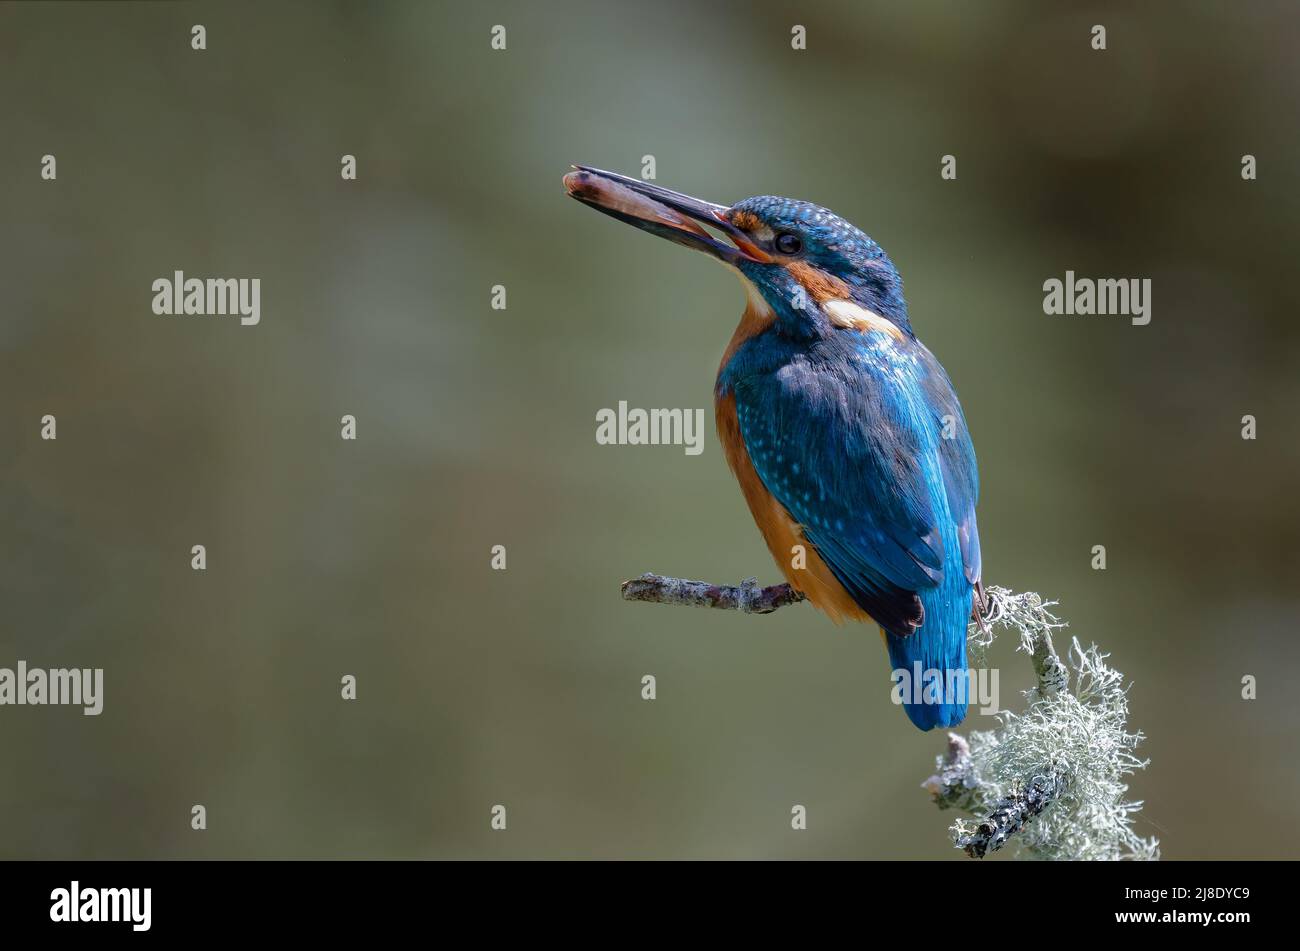 A male kingfisher perched having just caught a fish. He turned the fish in its beak tail first so when he feeds his his mate, he passes iy head first Stock Photo